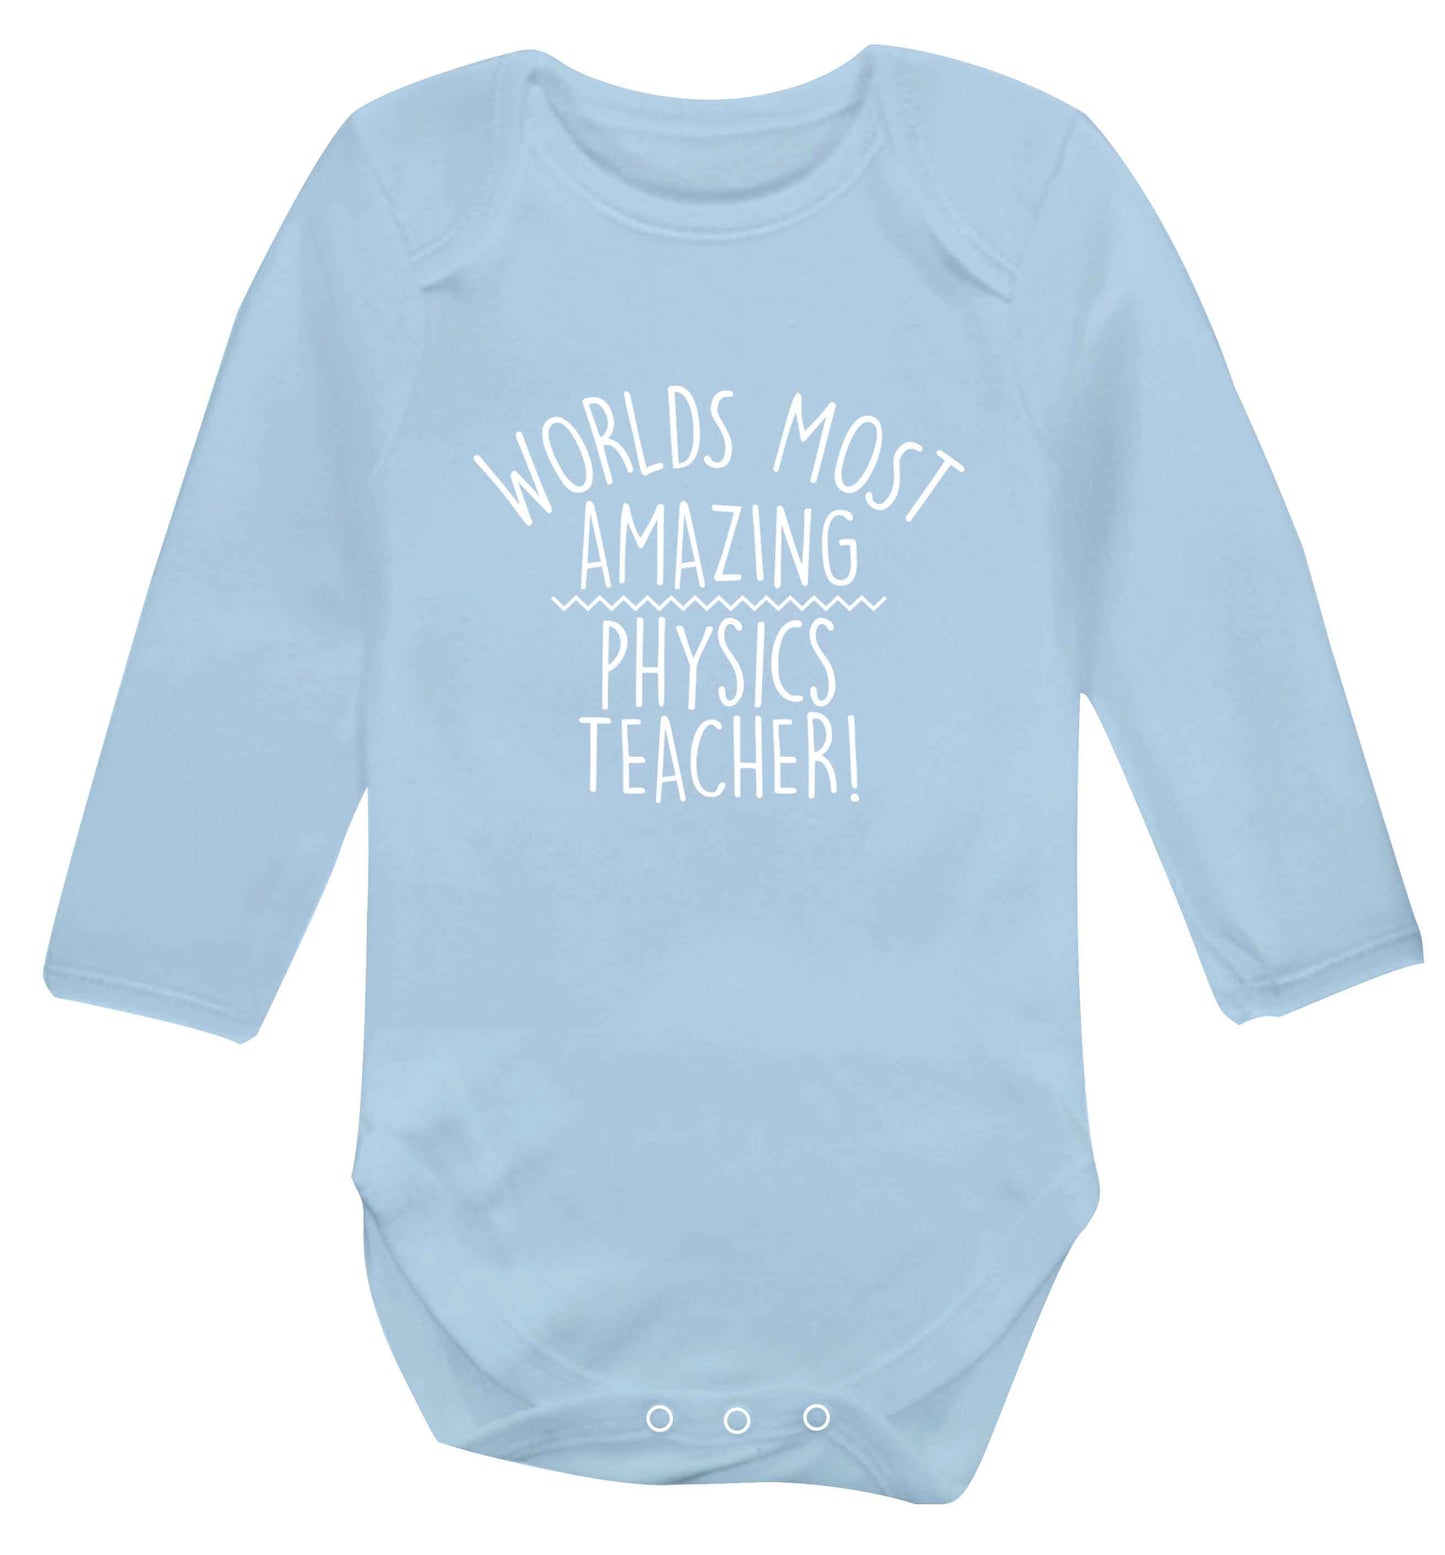 Worlds most amazing physics teacher baby vest long sleeved pale blue 6-12 months